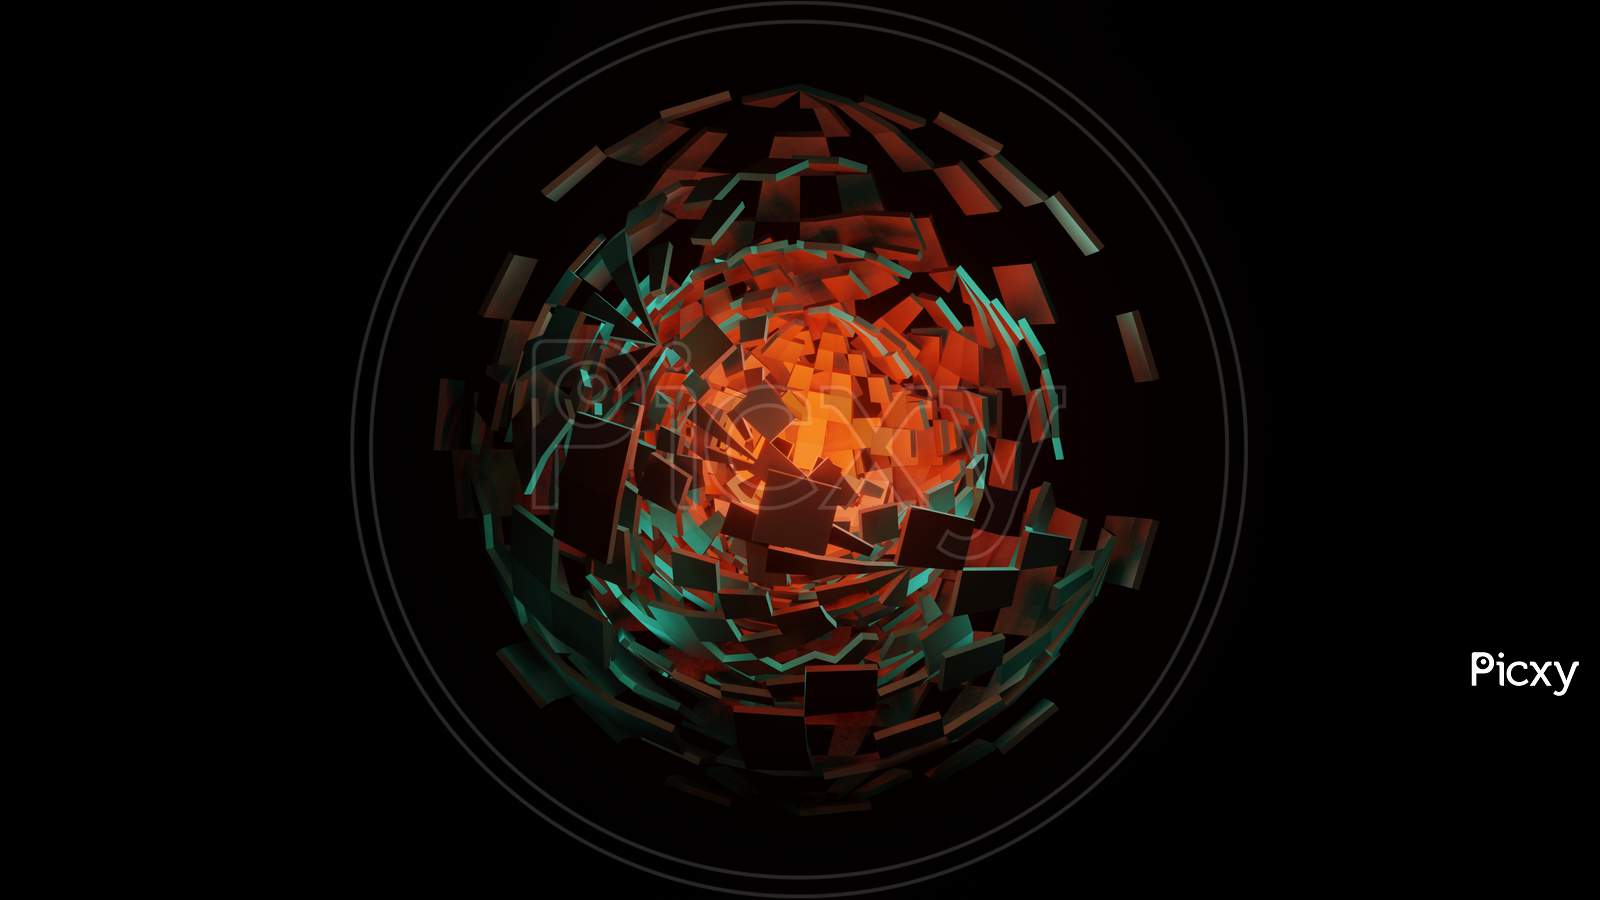 Illustration Graphic Of A Colorful 3D Sci-Fi Object With Glowing Energy At Center.